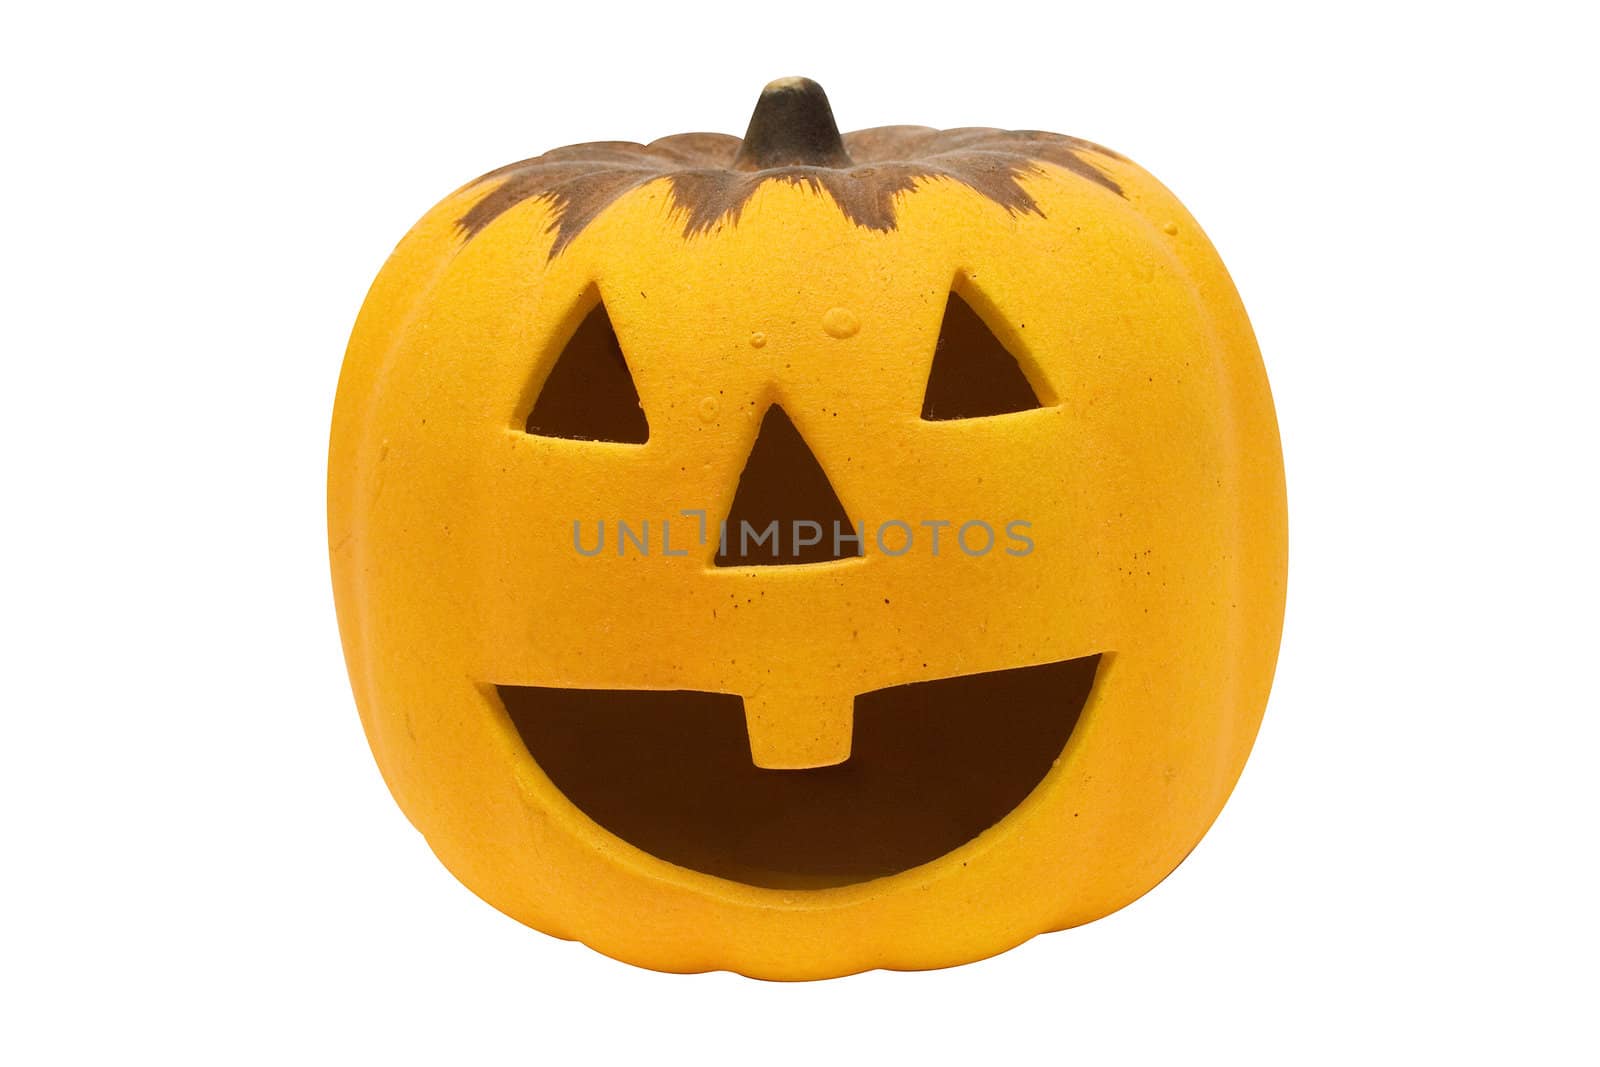 Ceramic pumpkin isolated on a white background.